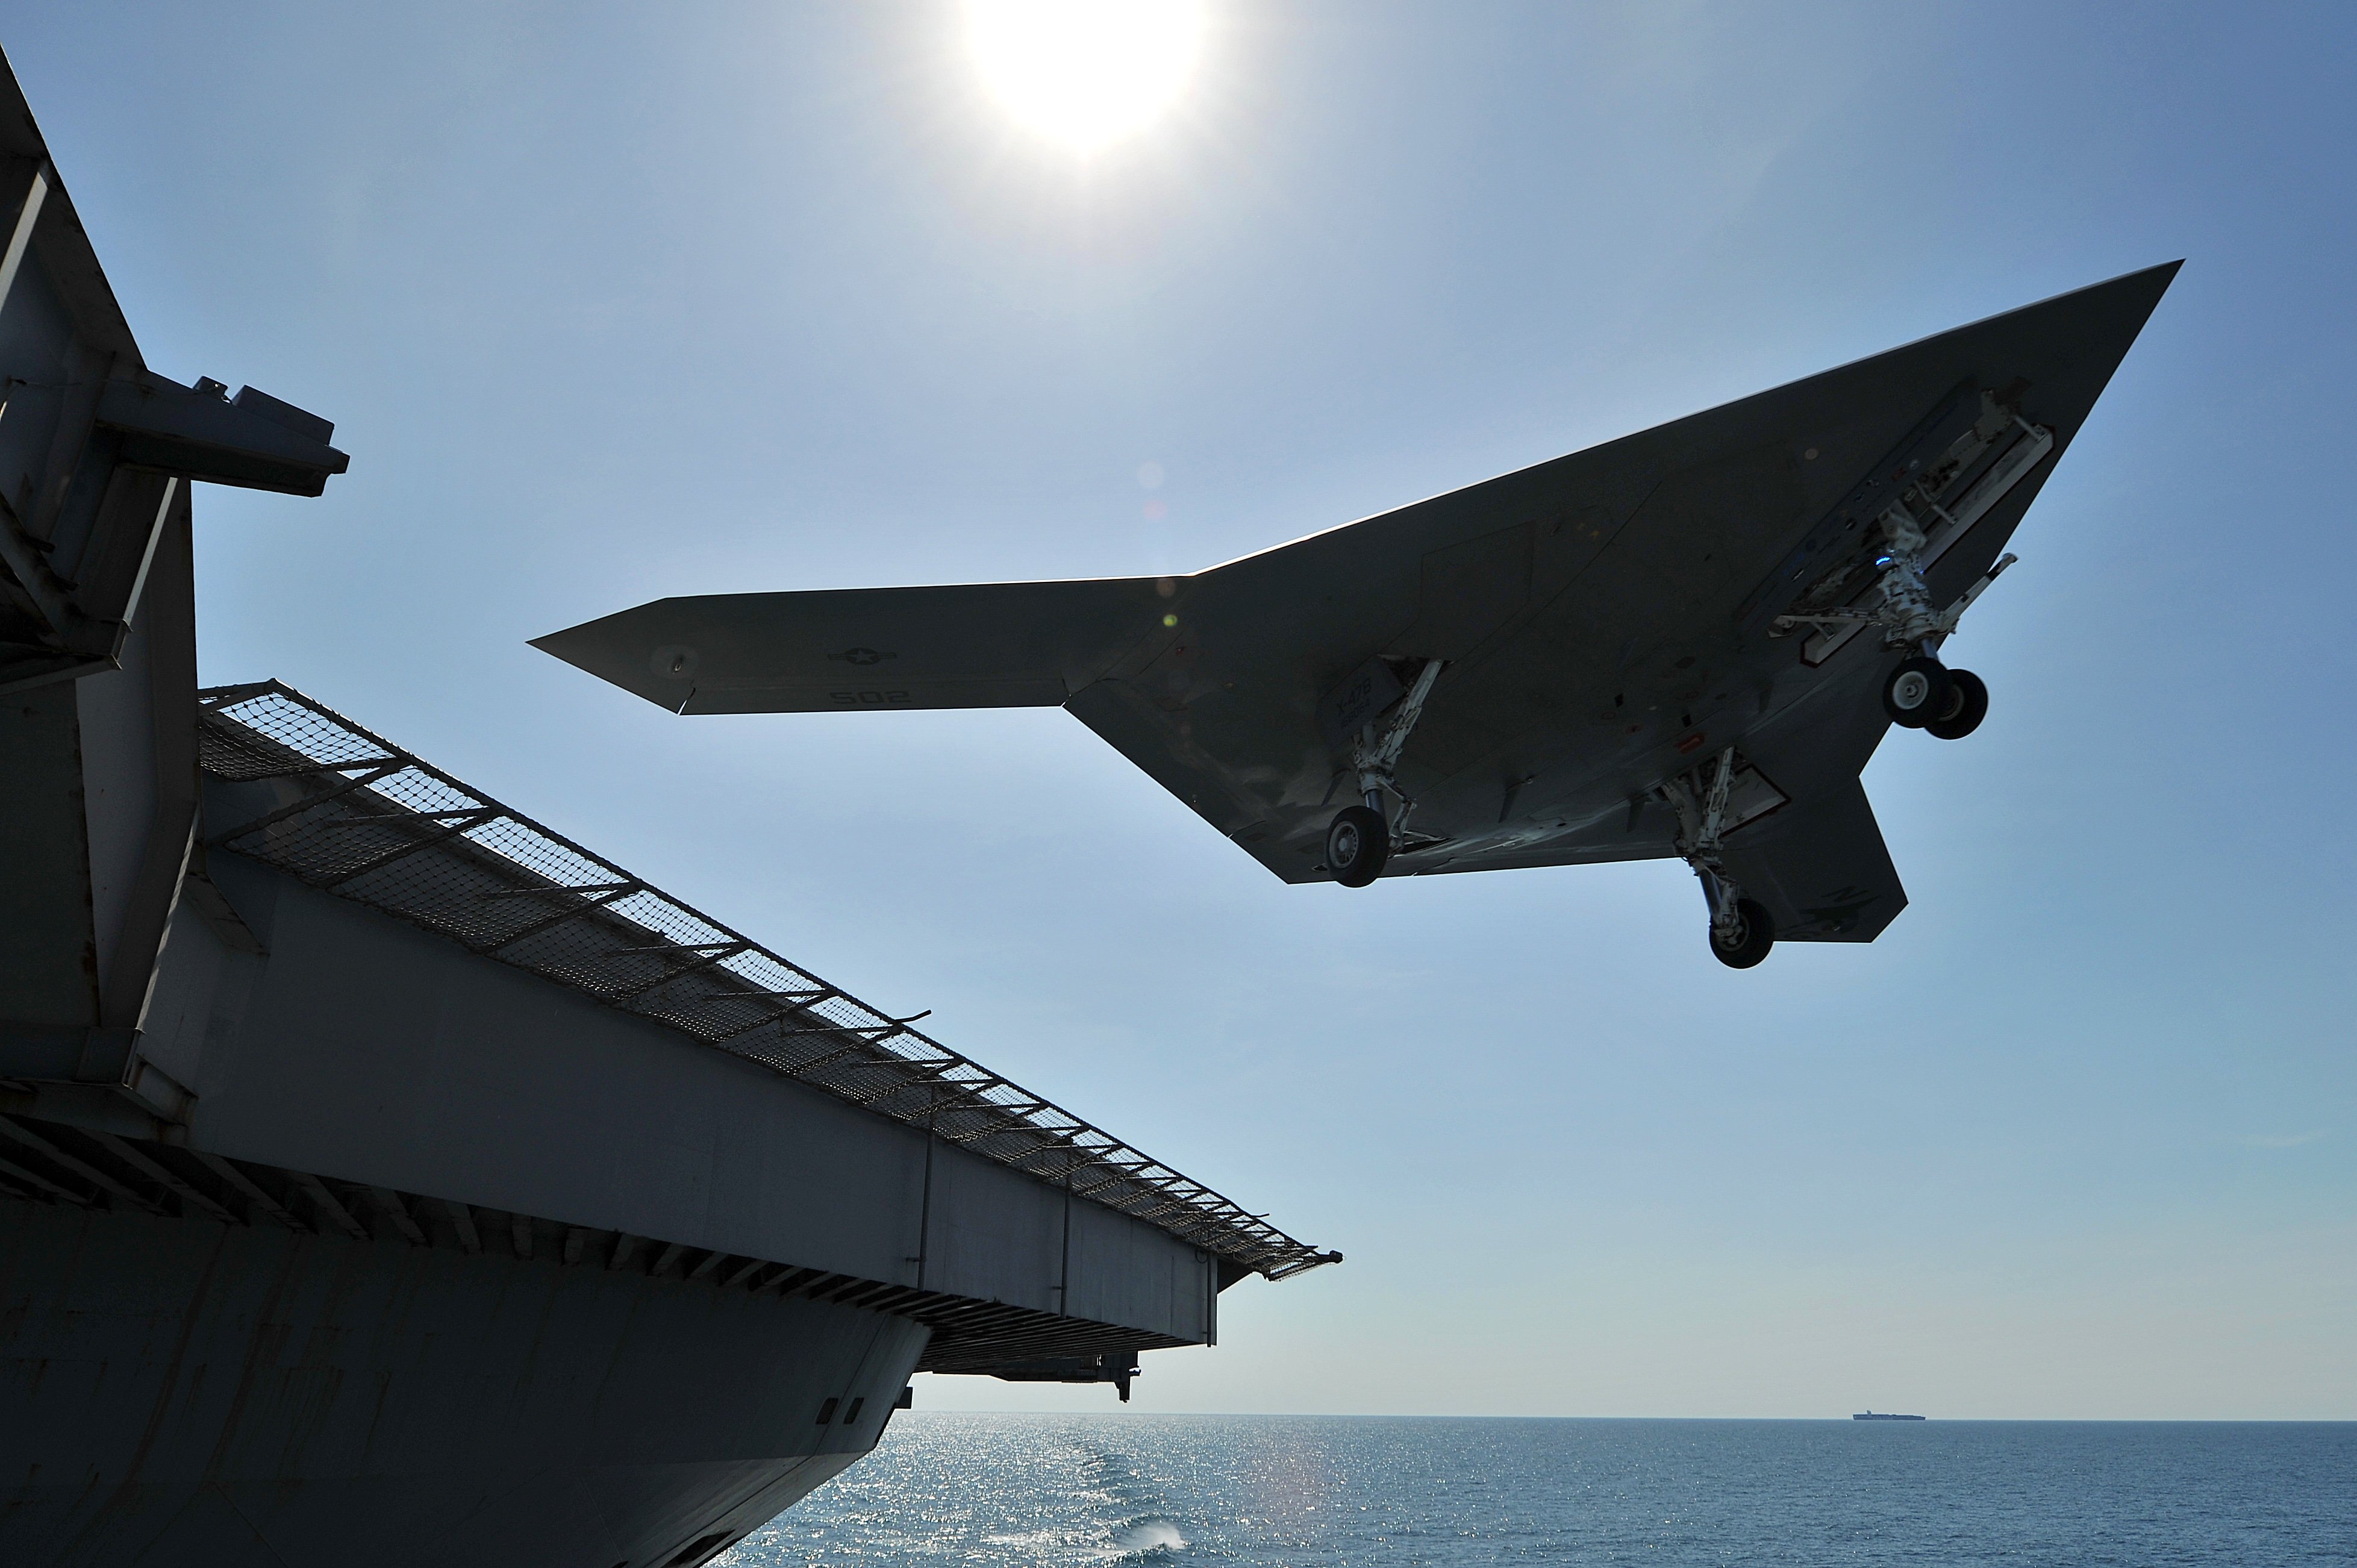 An X-47B Unmanned Combat Air System (UCAS) demonstrator conducts a touch and go landing on the flight deck of the aircraft carrier USS George H.W. Bush (CVN-77). US Navy Photo